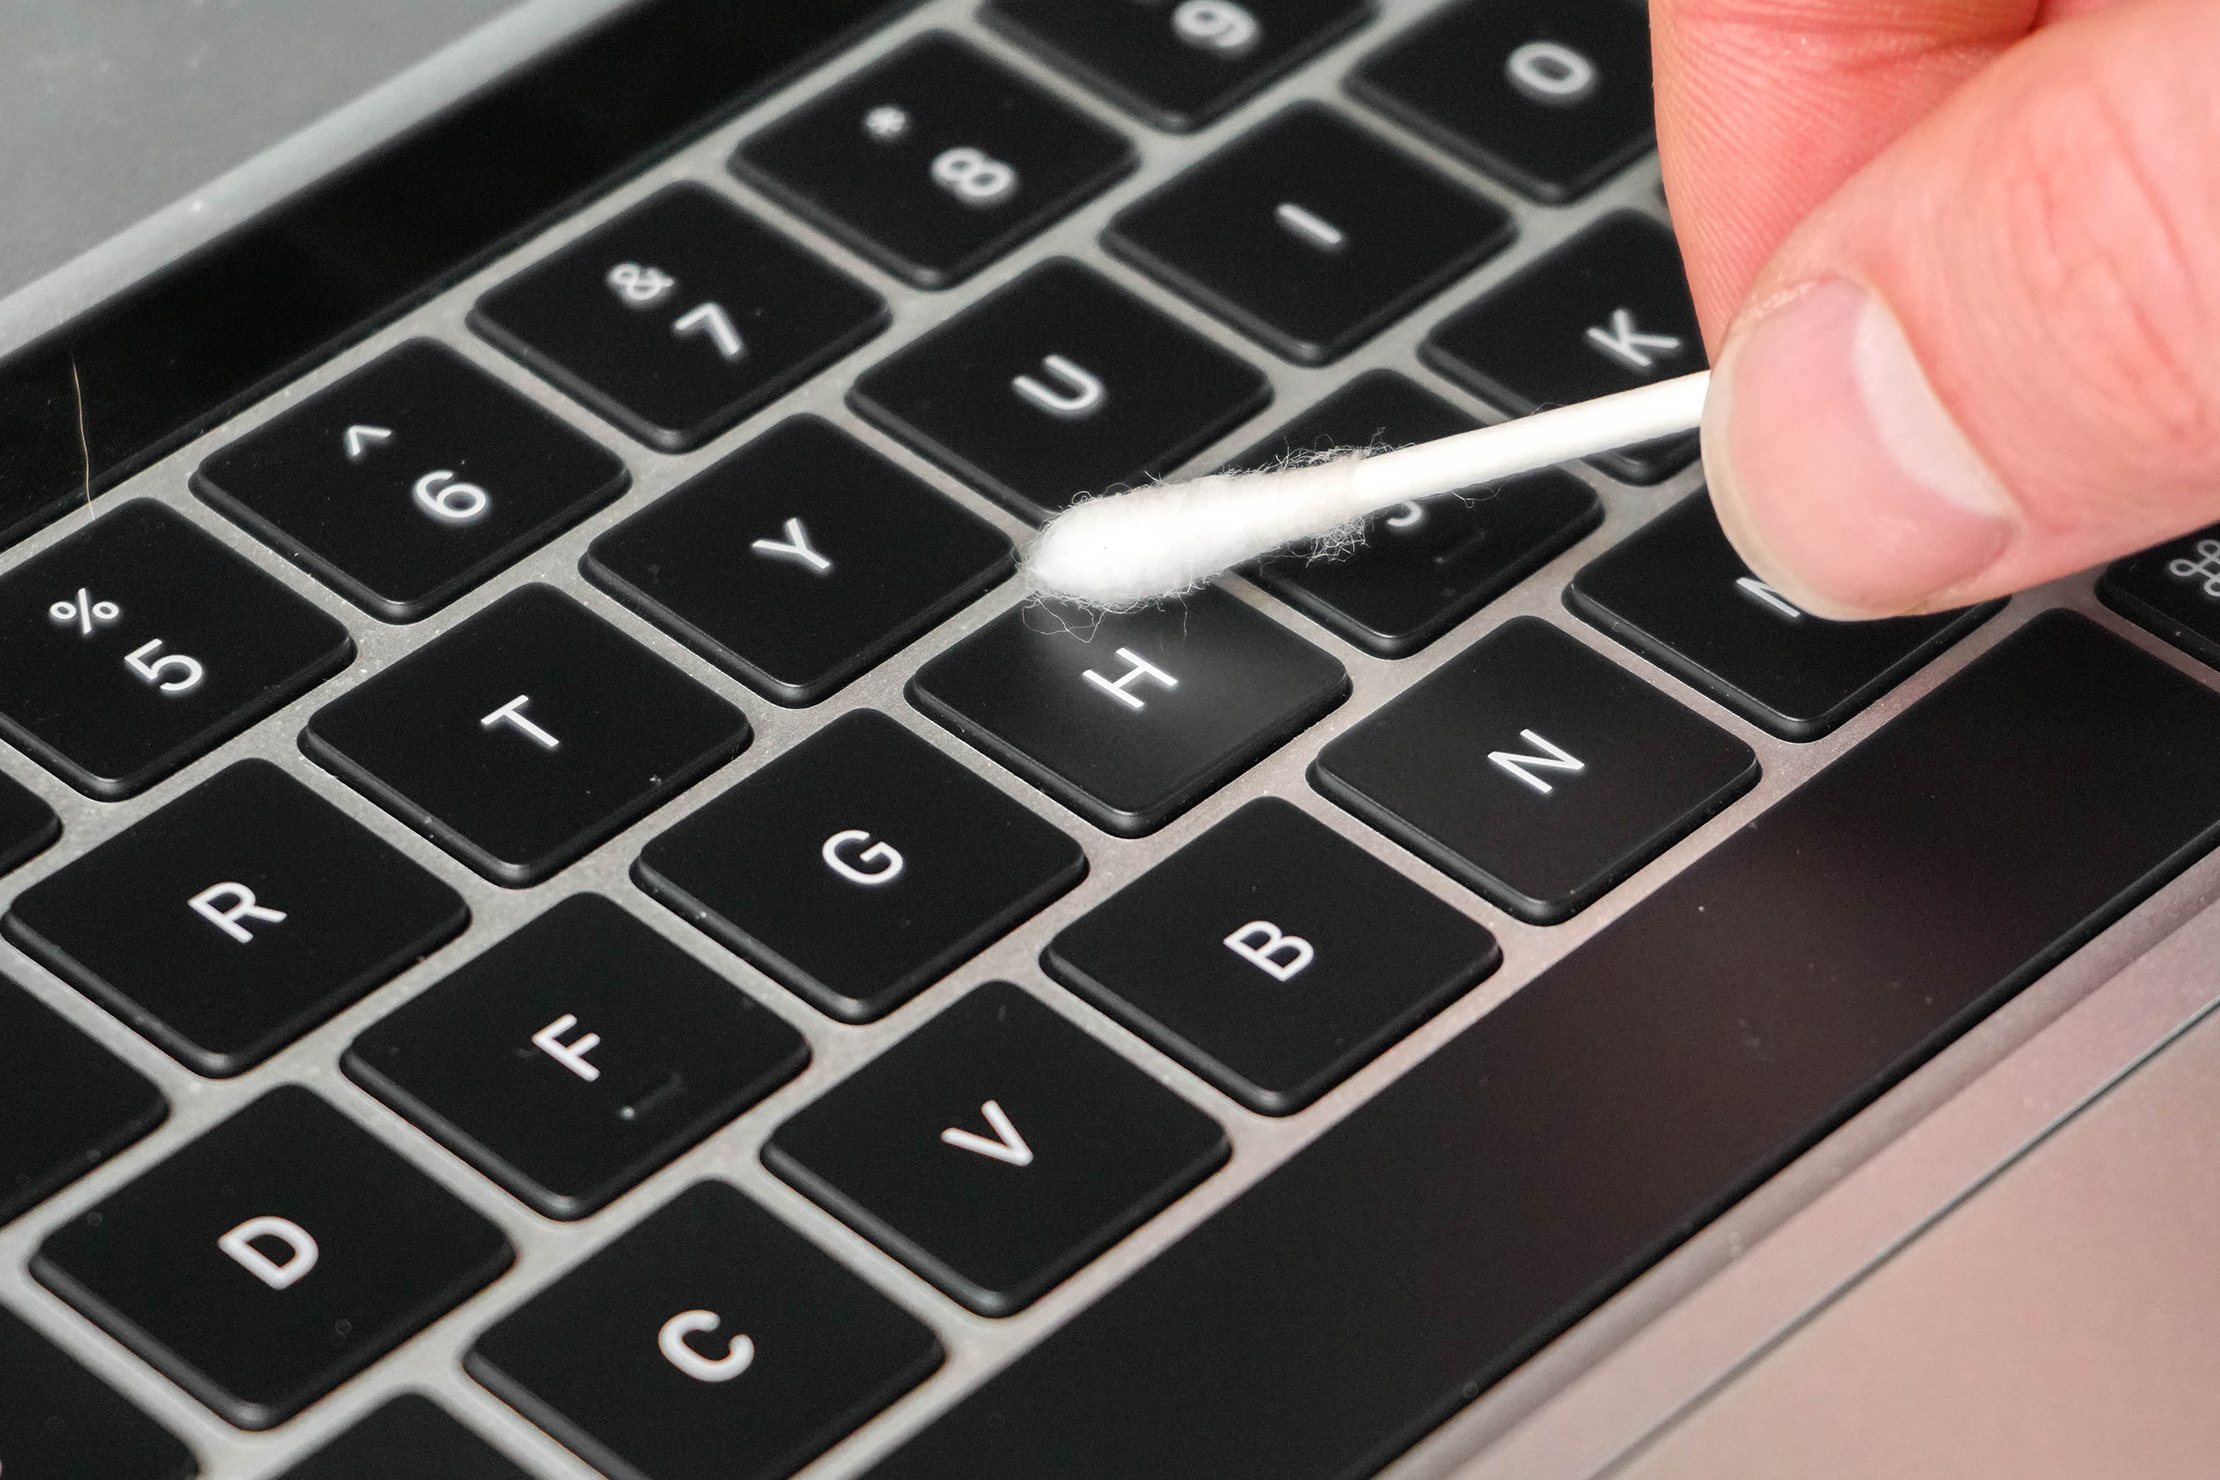 Cleaning Keyboard with Cotton Swab